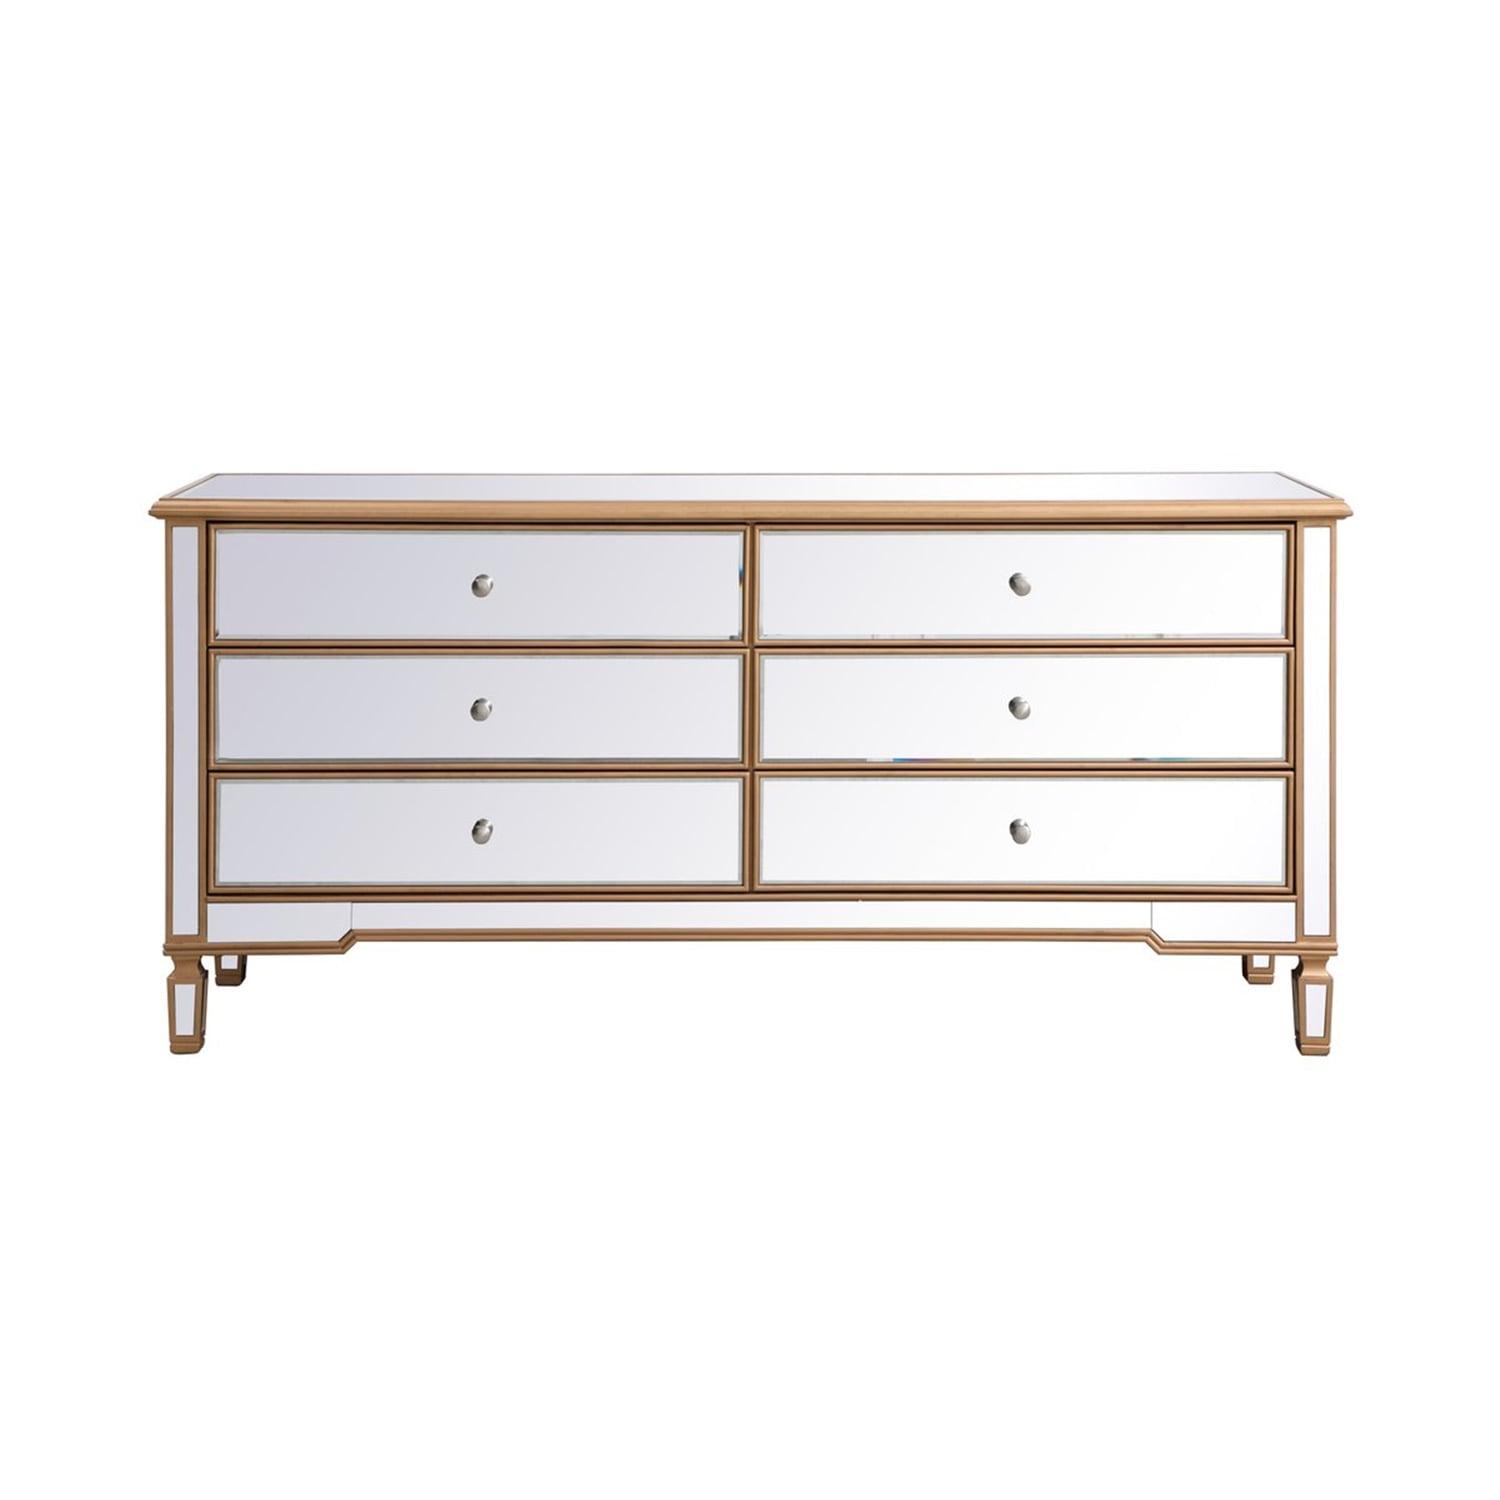 Antique Gold Mirrored Dresser with Deep Drawers and Brushed Steel Knobs